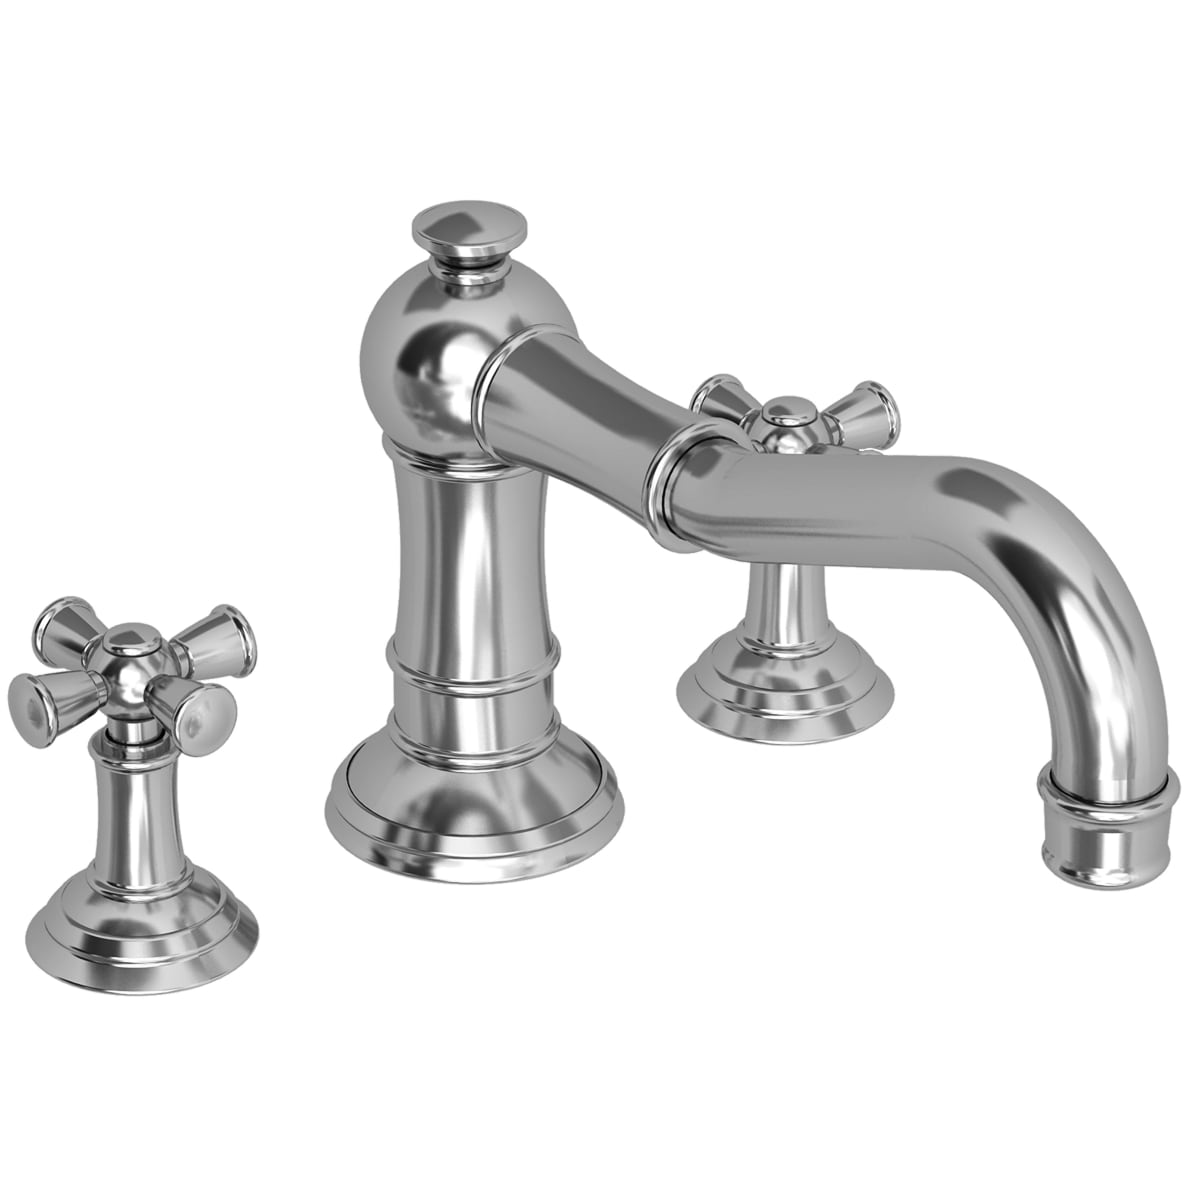 Newport Brass 3 2466 26 Polished Chrome Double Handle Deck Mounted